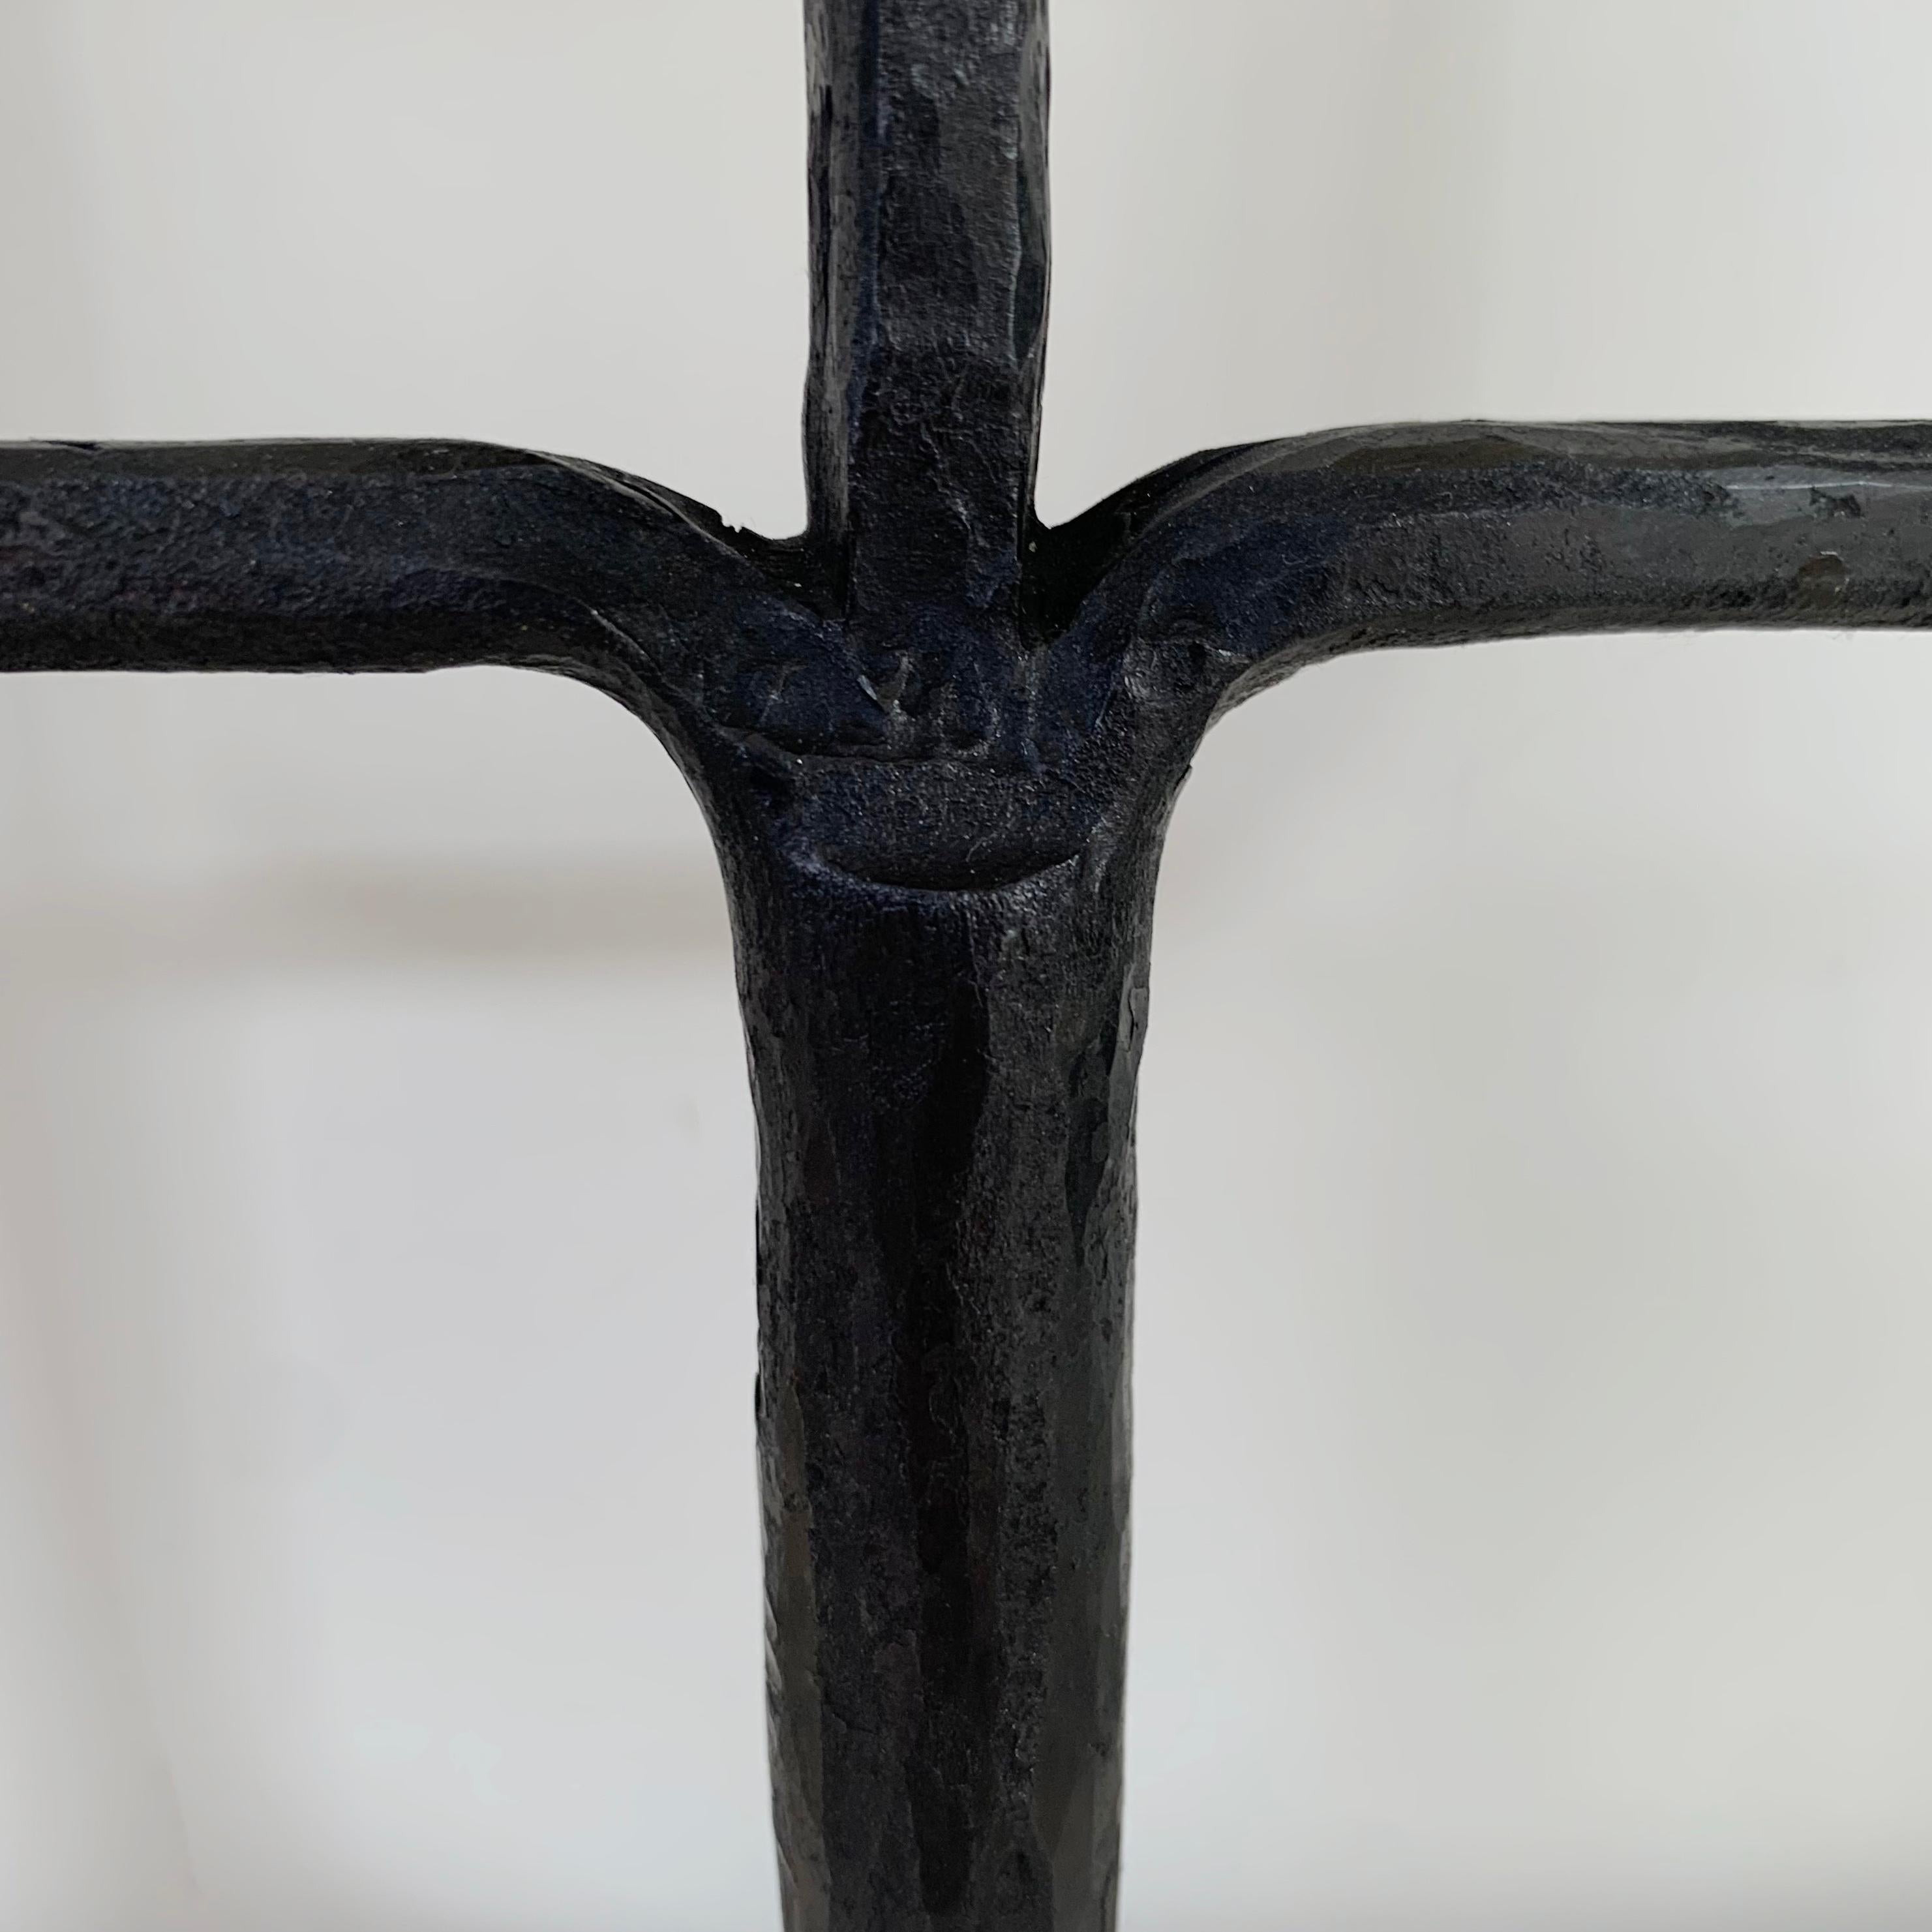 Wrought Iron Candlestick in the Style of Ateliers de Marolles, France c.1950 For Sale 2